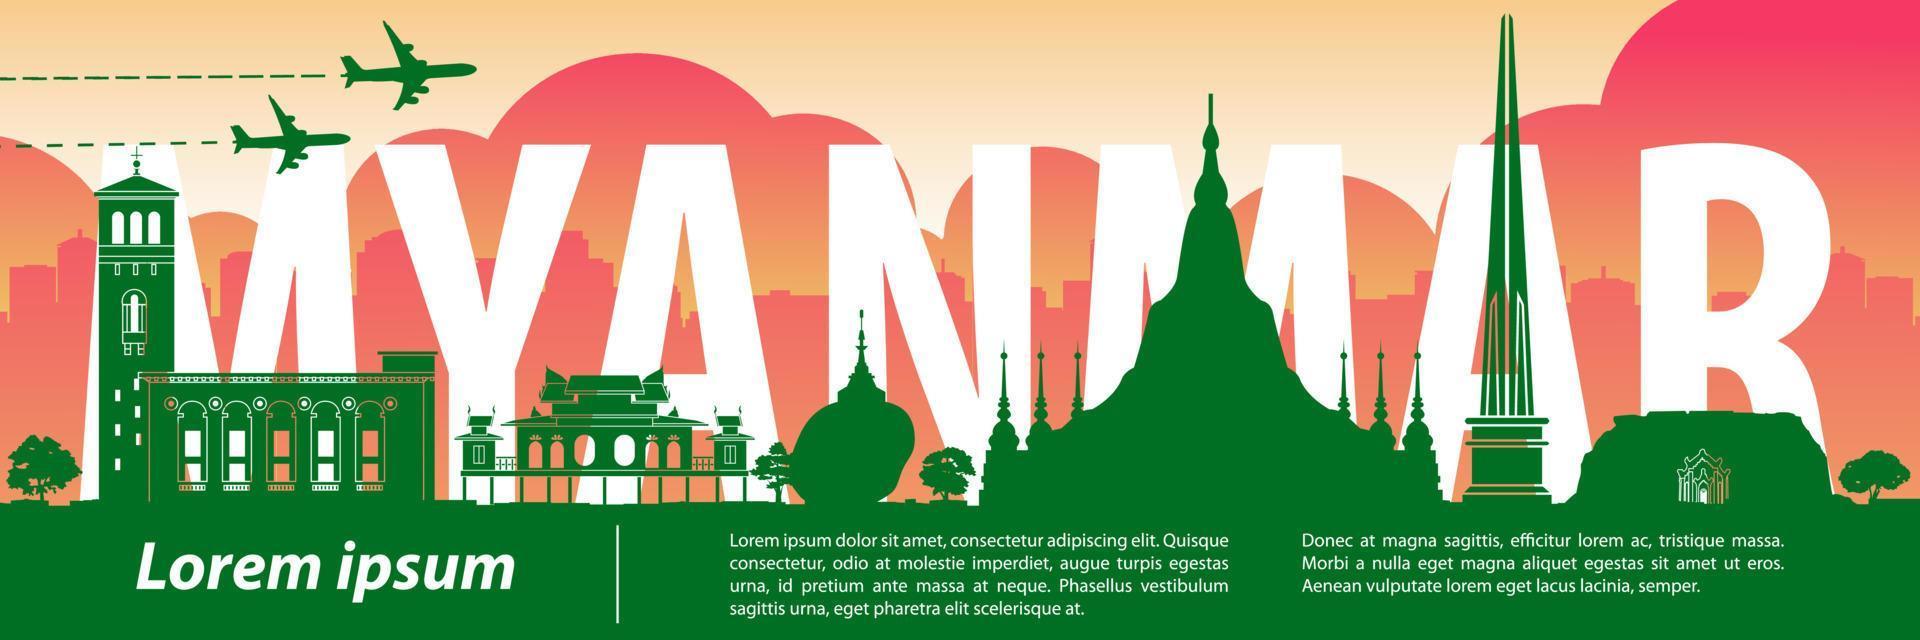 myanmar top famous landmarks silhouette style,travel and tourism vector